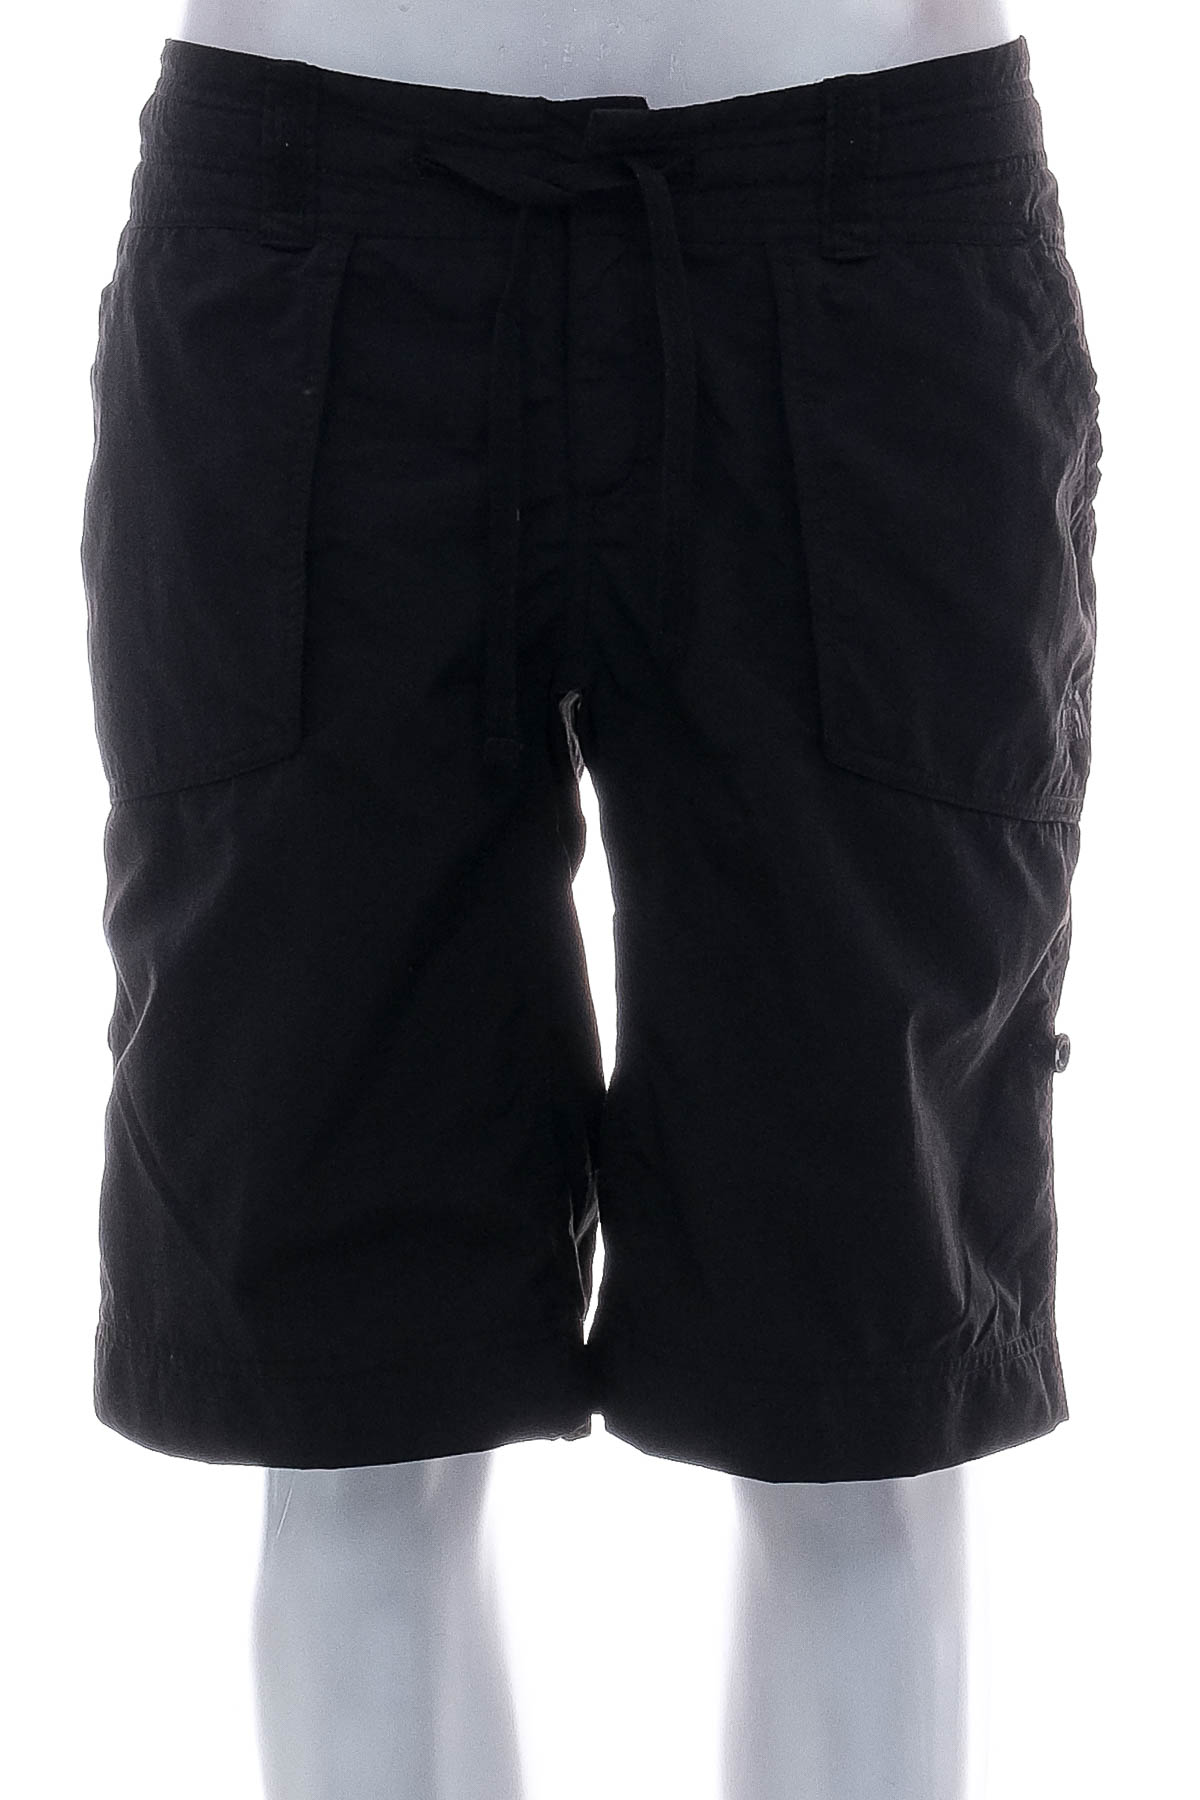 Female shorts - The North Face - 0